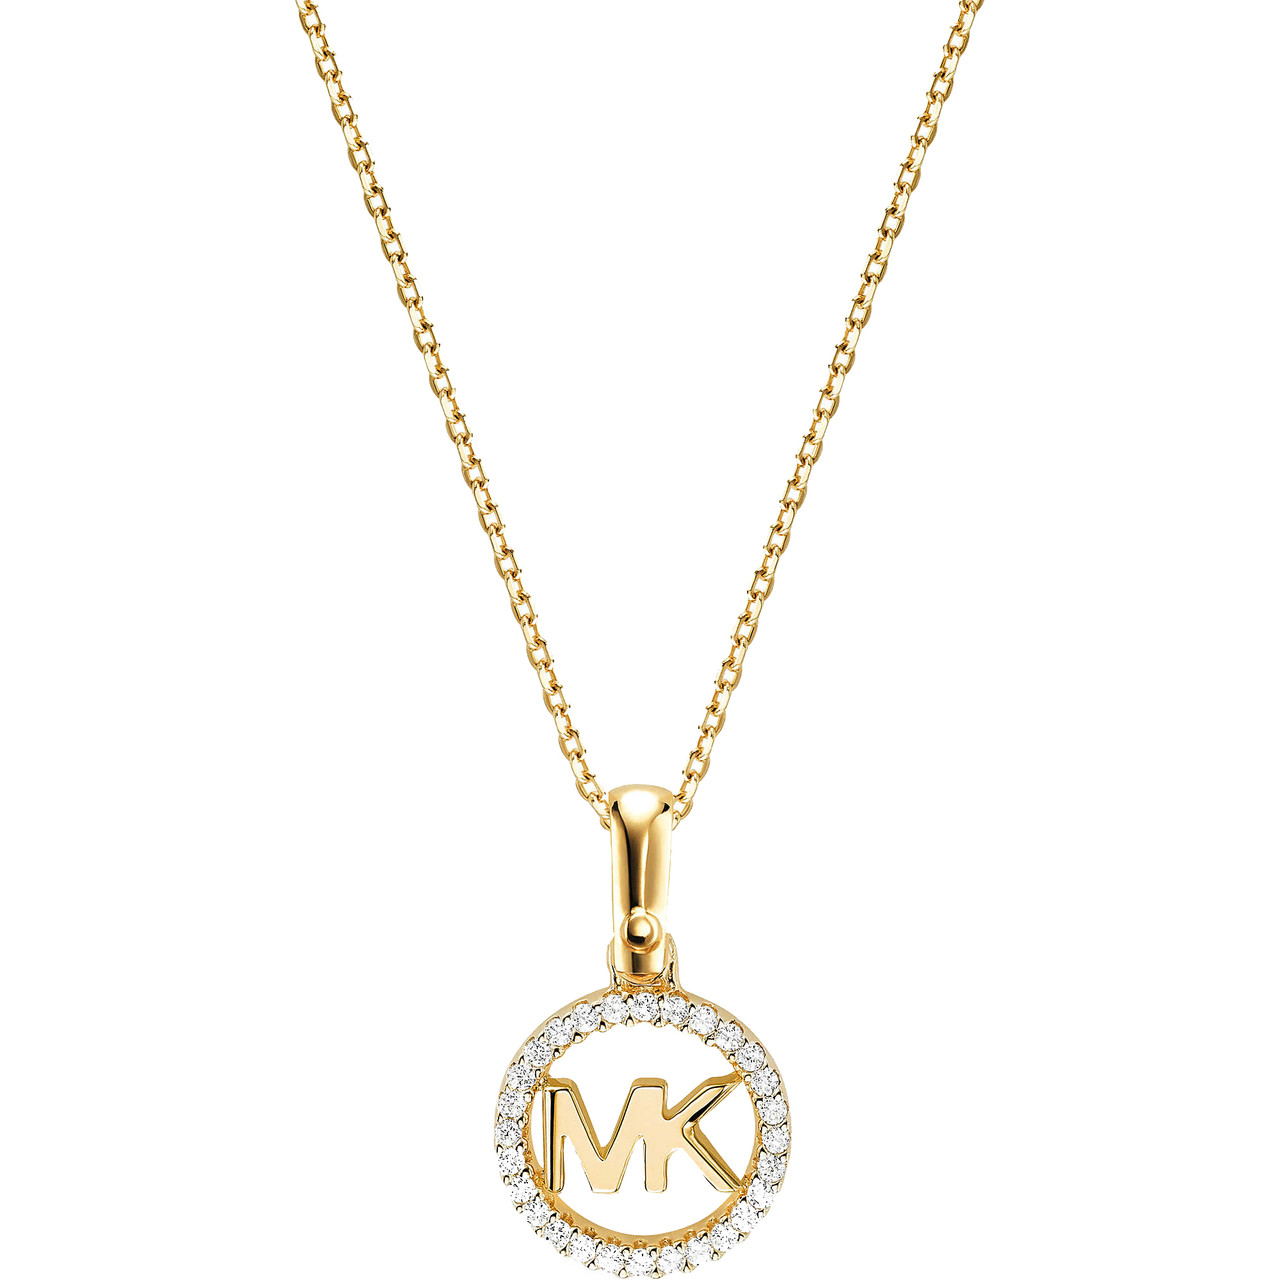 Michael Kors Ladies 14K Gold Plated Pave Set Cubic Zirconia Logo Starter Necklace MKC1108AN710